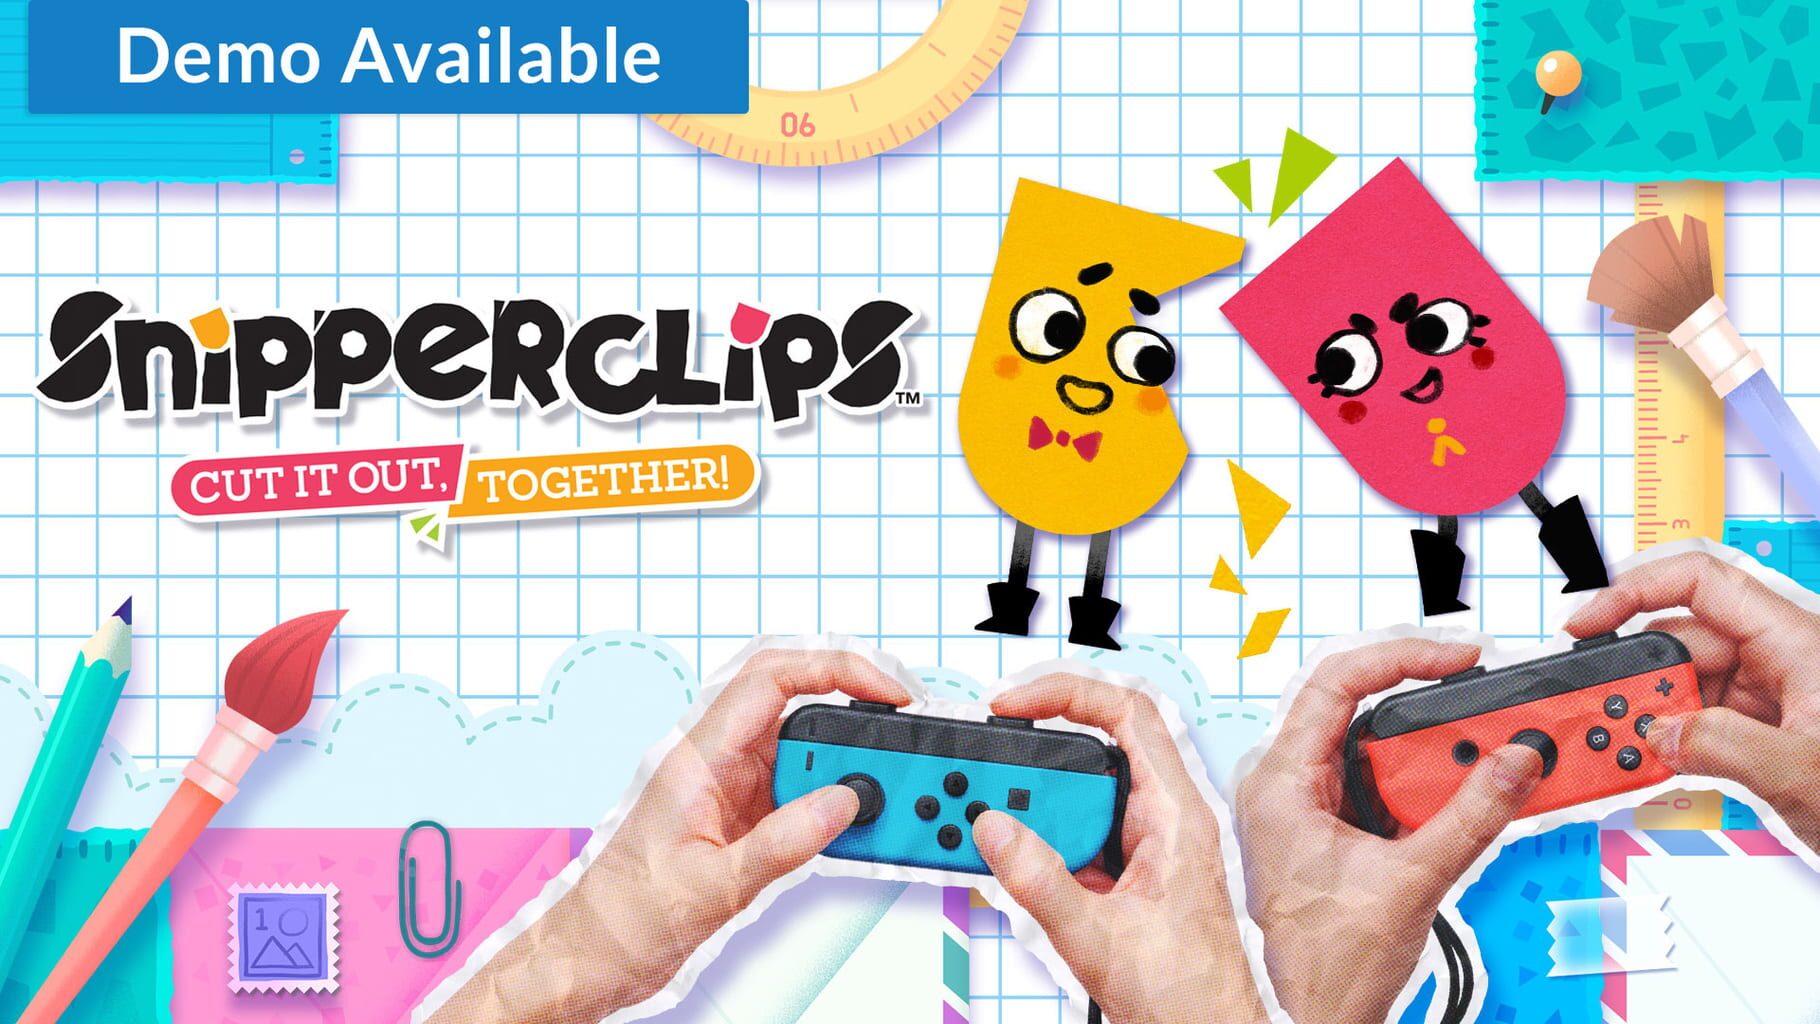 Snipperclips: Cut It Out, Together! artwork